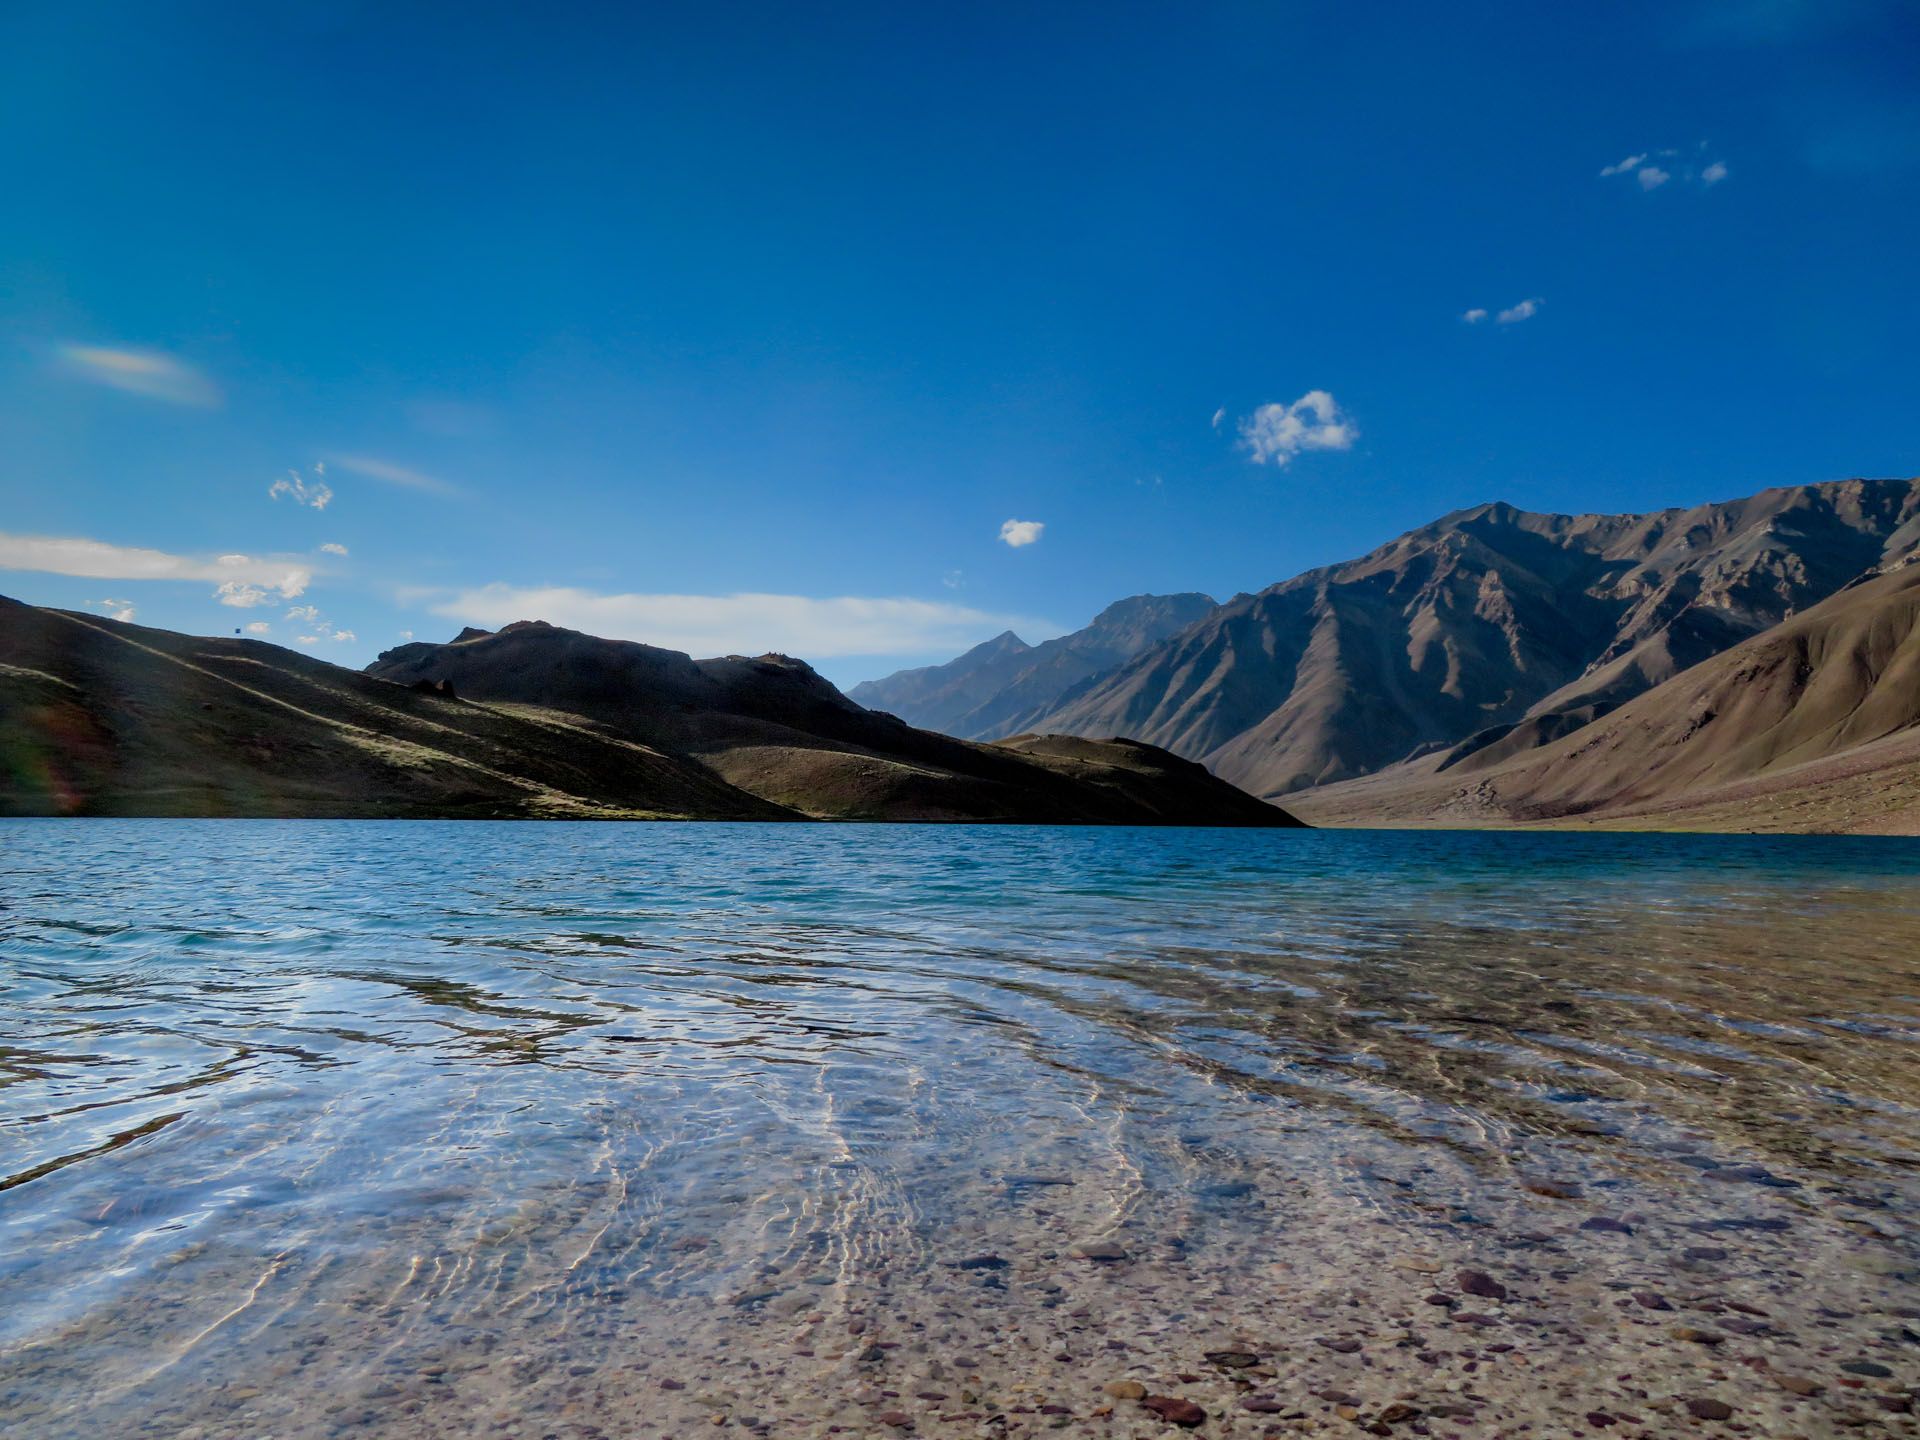 Trekking in Spiti Valley? Here are a few places you shouldn't miss!